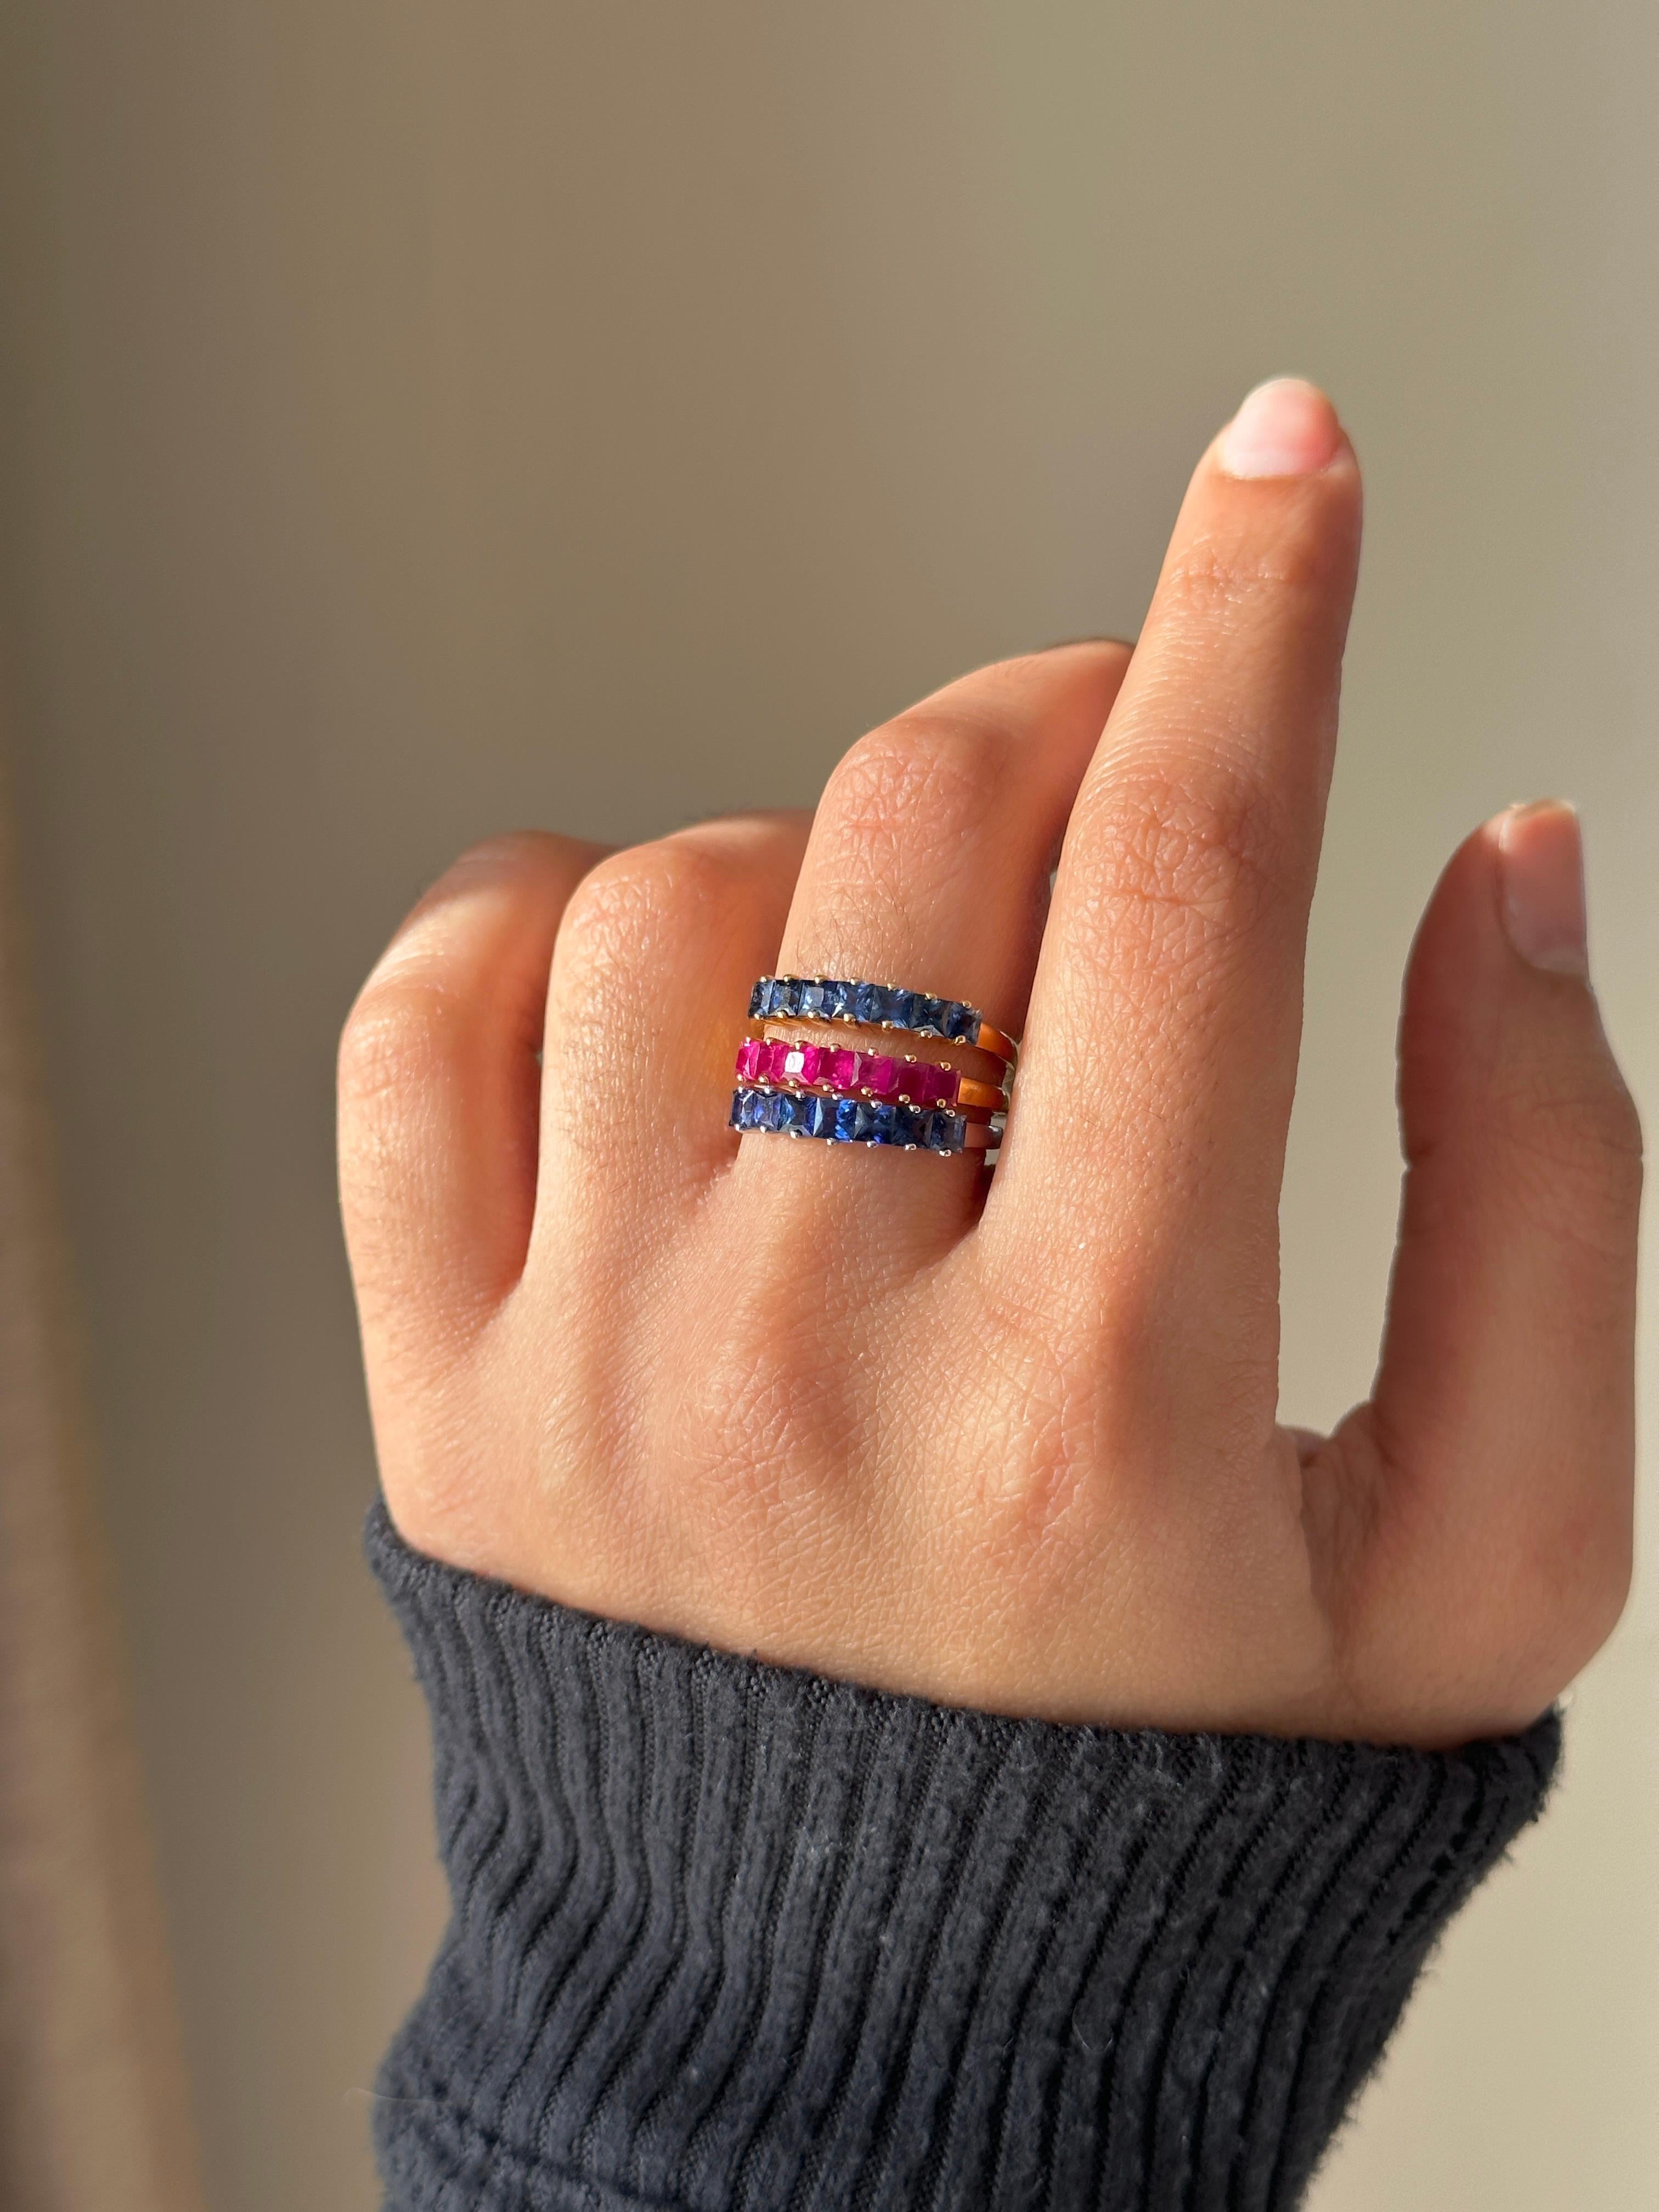 Princess cut gemstone ring
crafted in 18k solid gold with AAA grade natural Ruby and Sapphires


- Looks beautiful stacked with other rings or worn alone
- Gemstone options: Ruby and Sapphire
- Metal color available: Gold and White Gold
- Beautiful